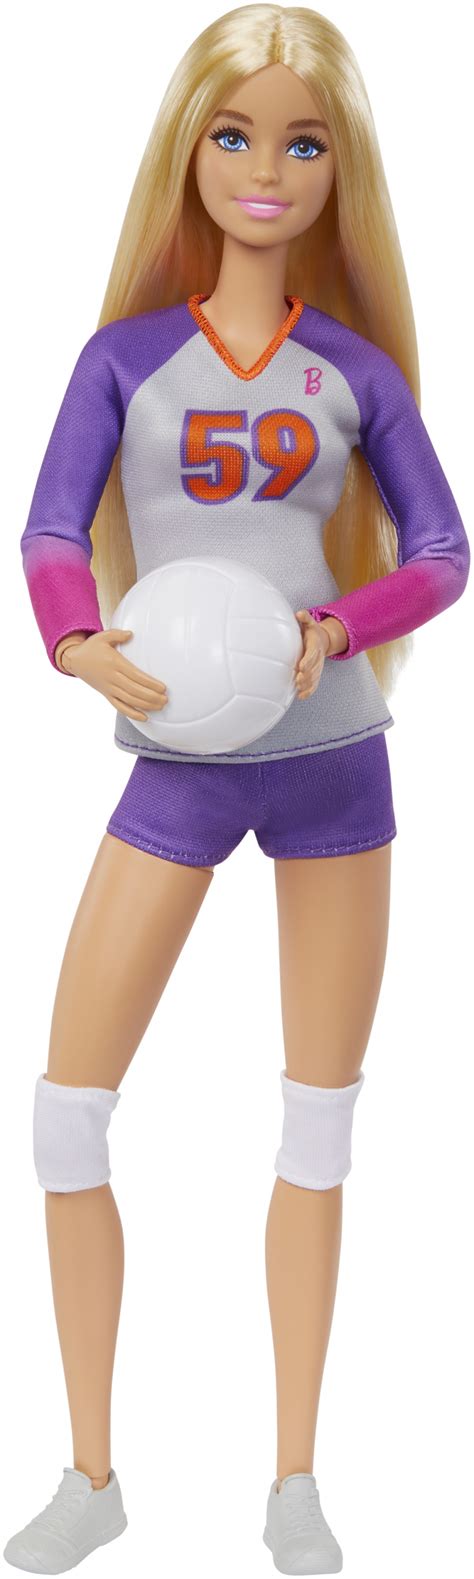 Barbie Made To Move Dolls Youloveit Com